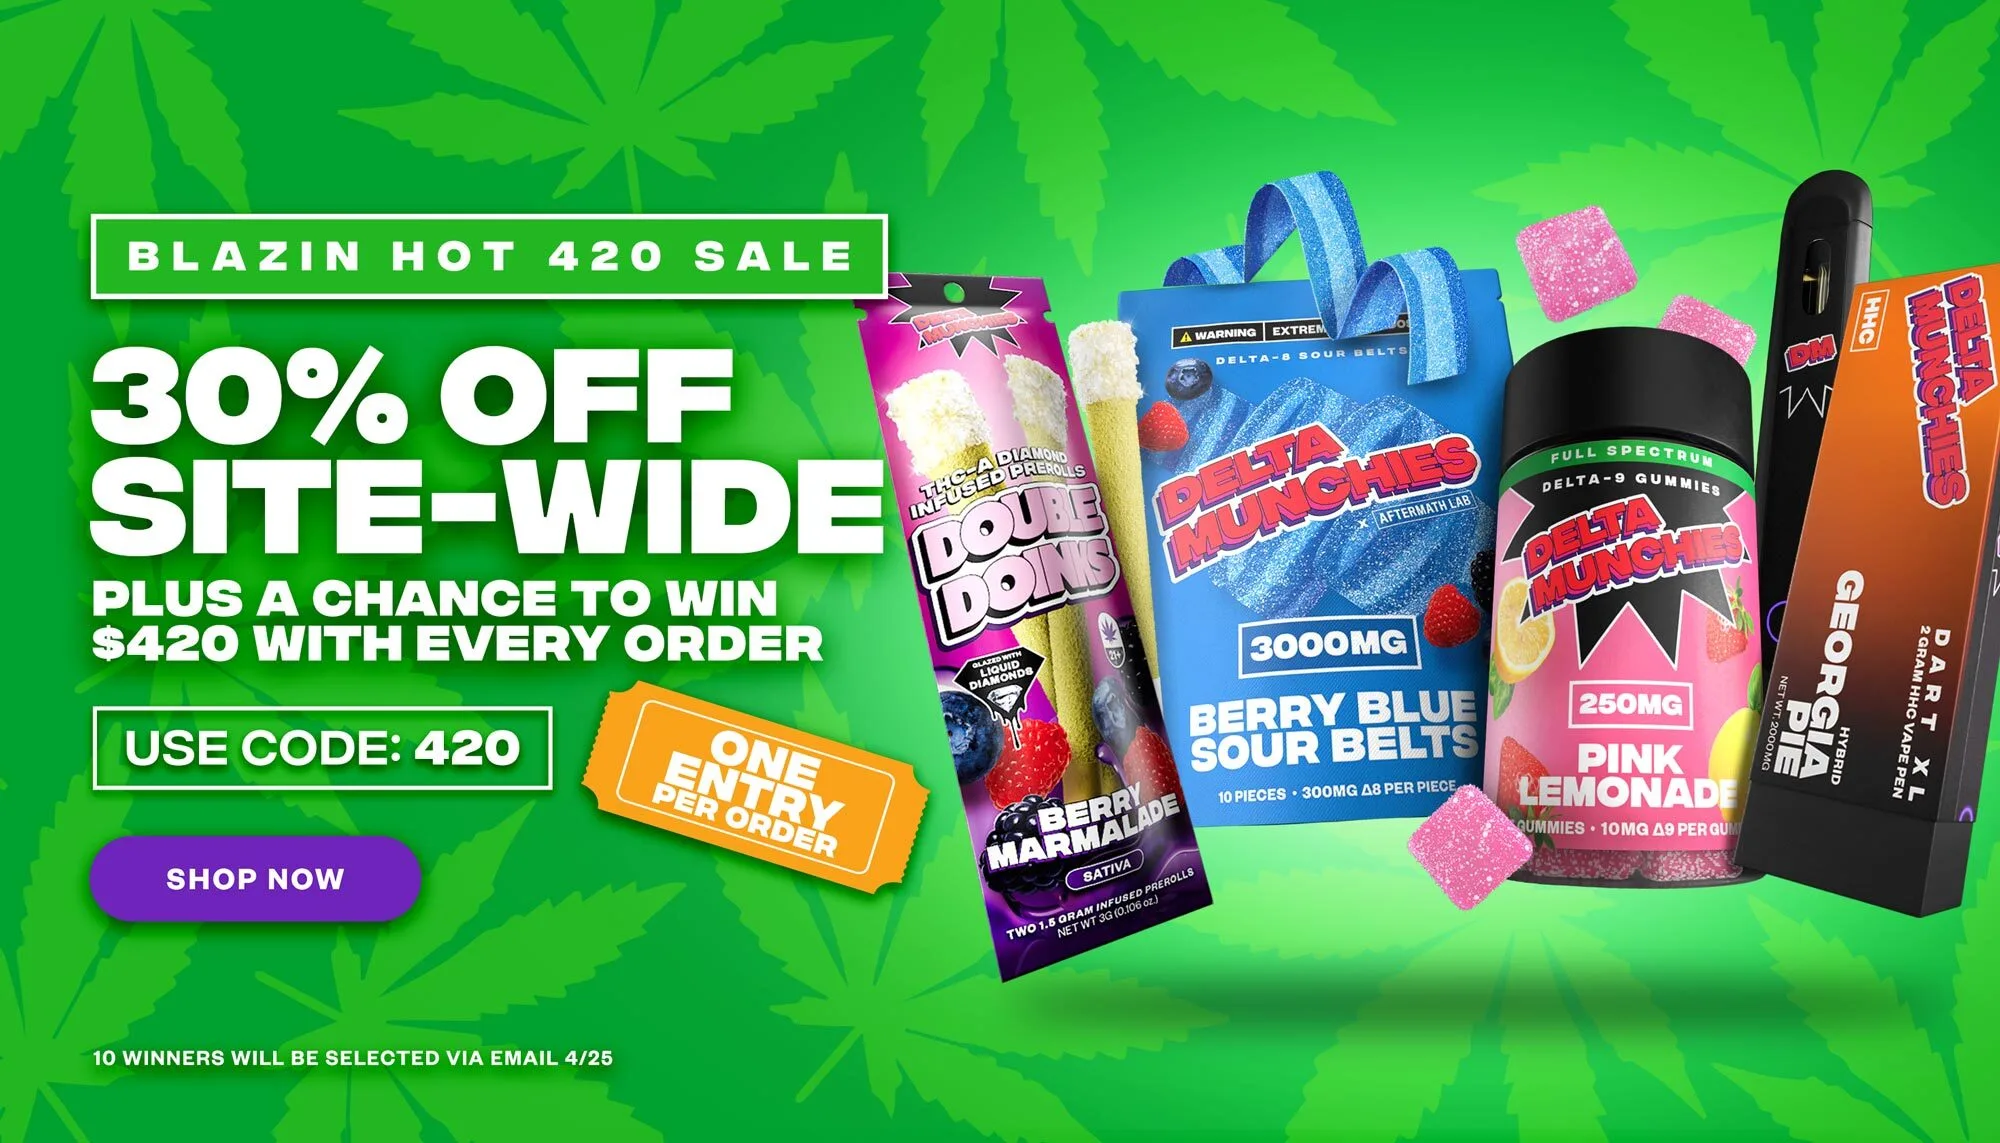 Blazin 420 sale! 30% off plus a chance to win a $420 gift card. Use code: 420.